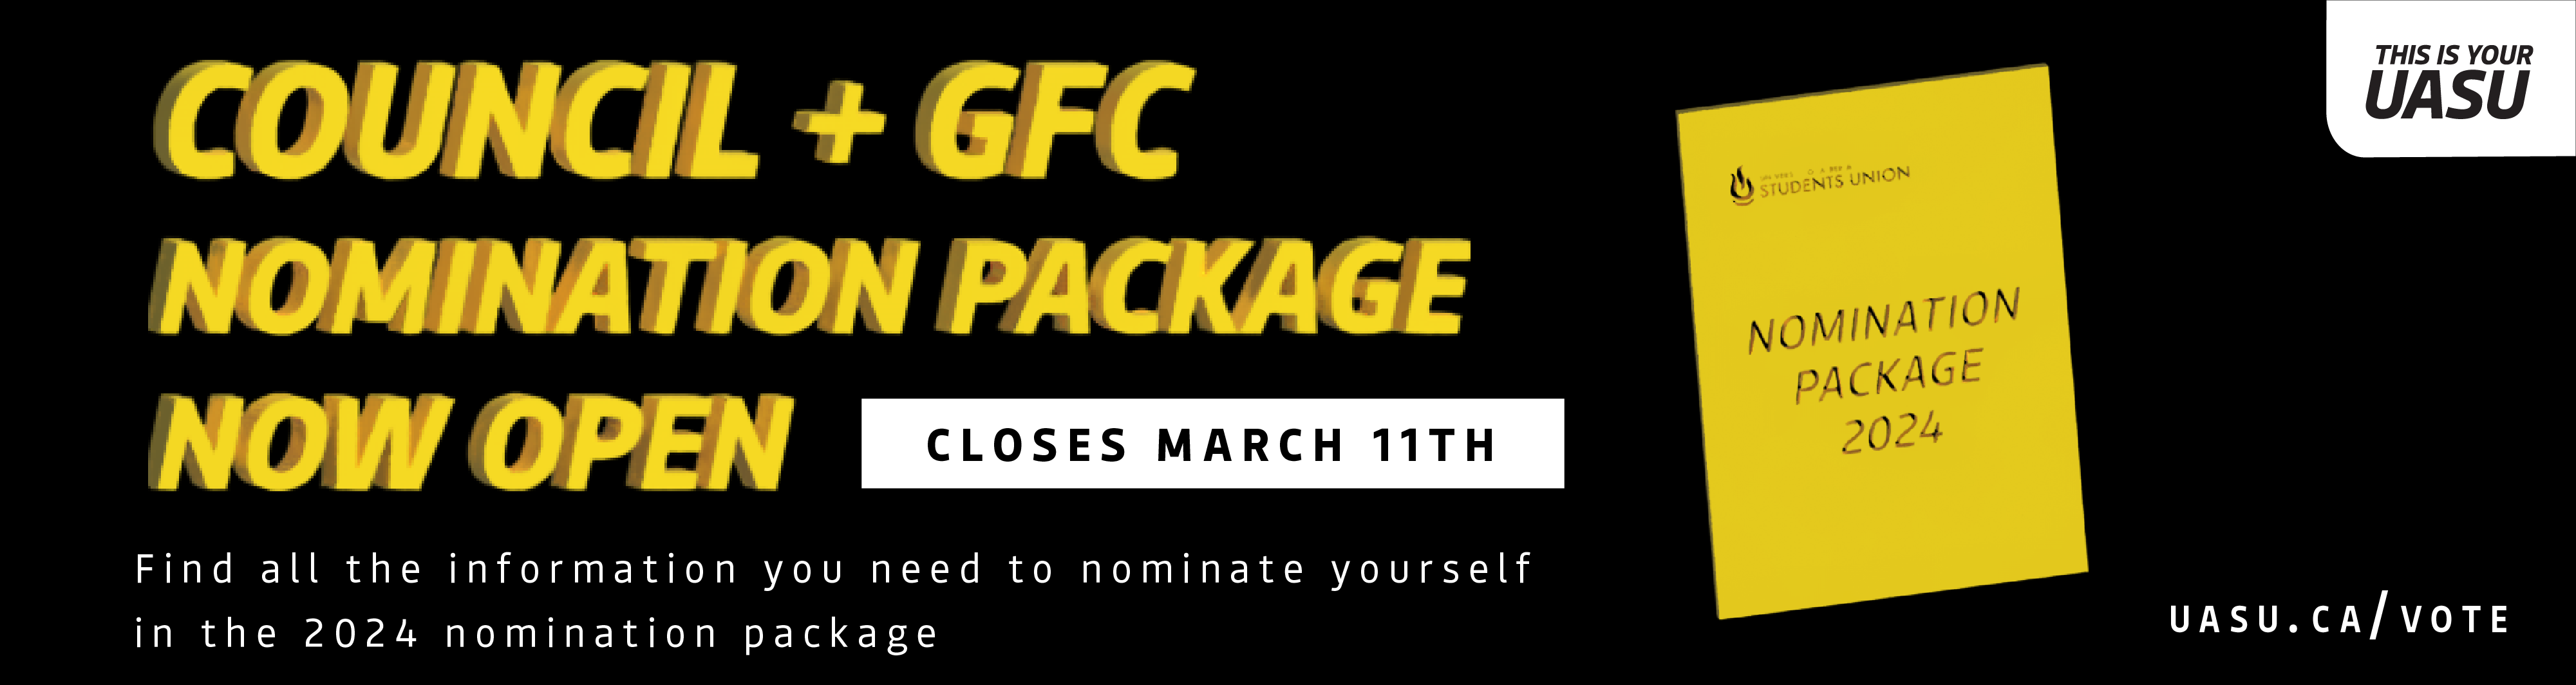 Council and GFC Nominations Open til March 11